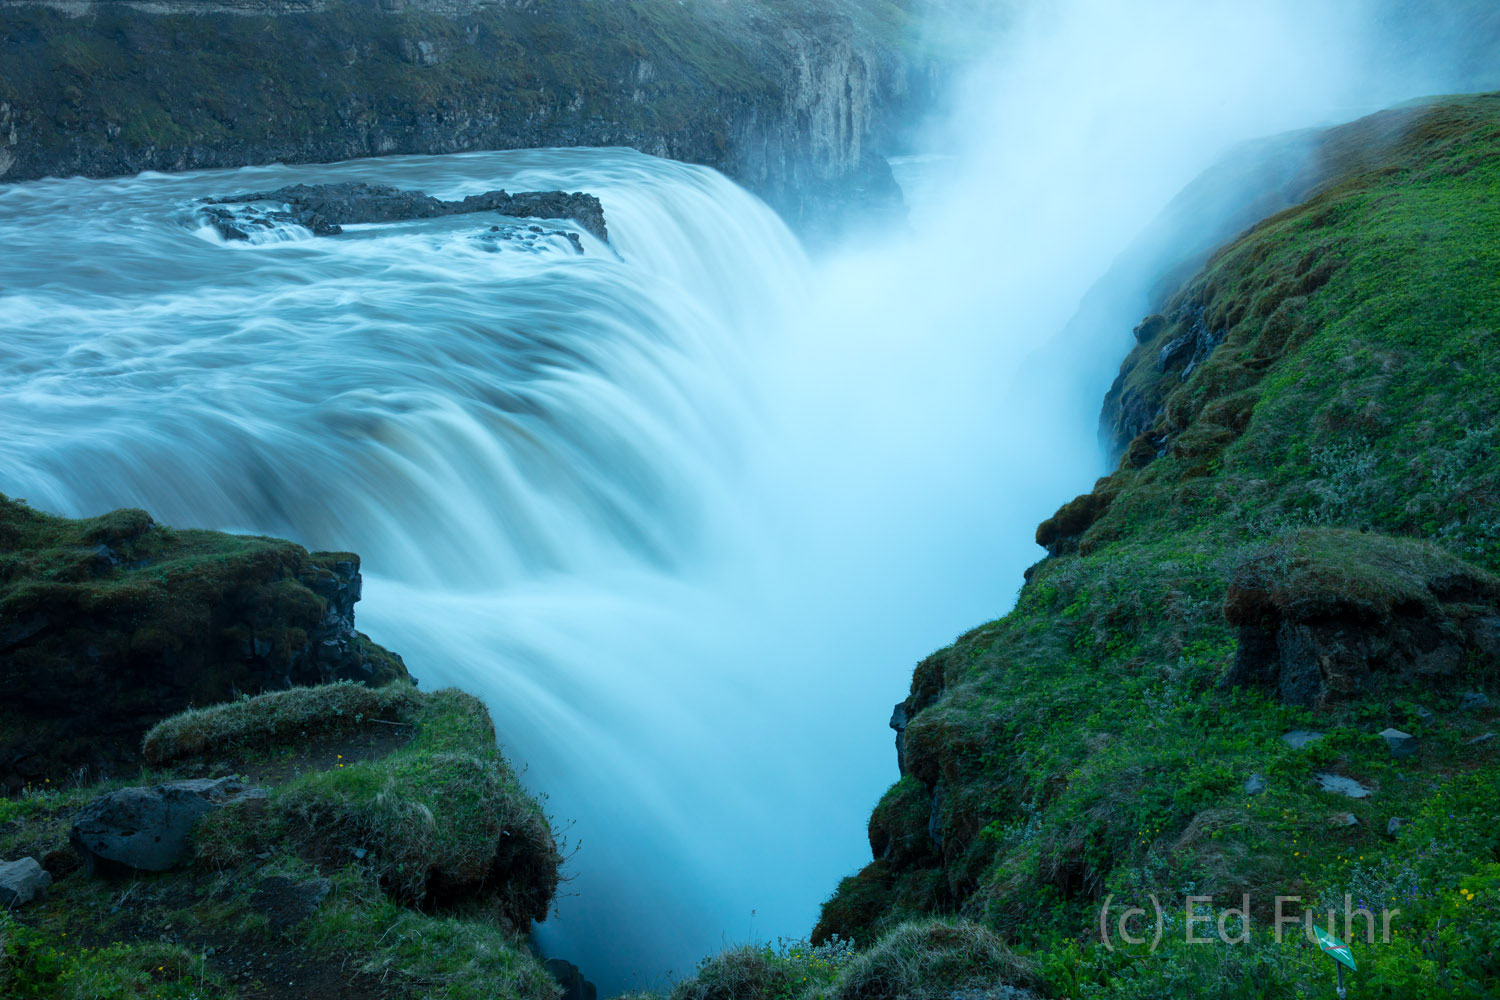 The Hvita River seems to disappea into the abyss in this second drop of the mighty Gulfoss.